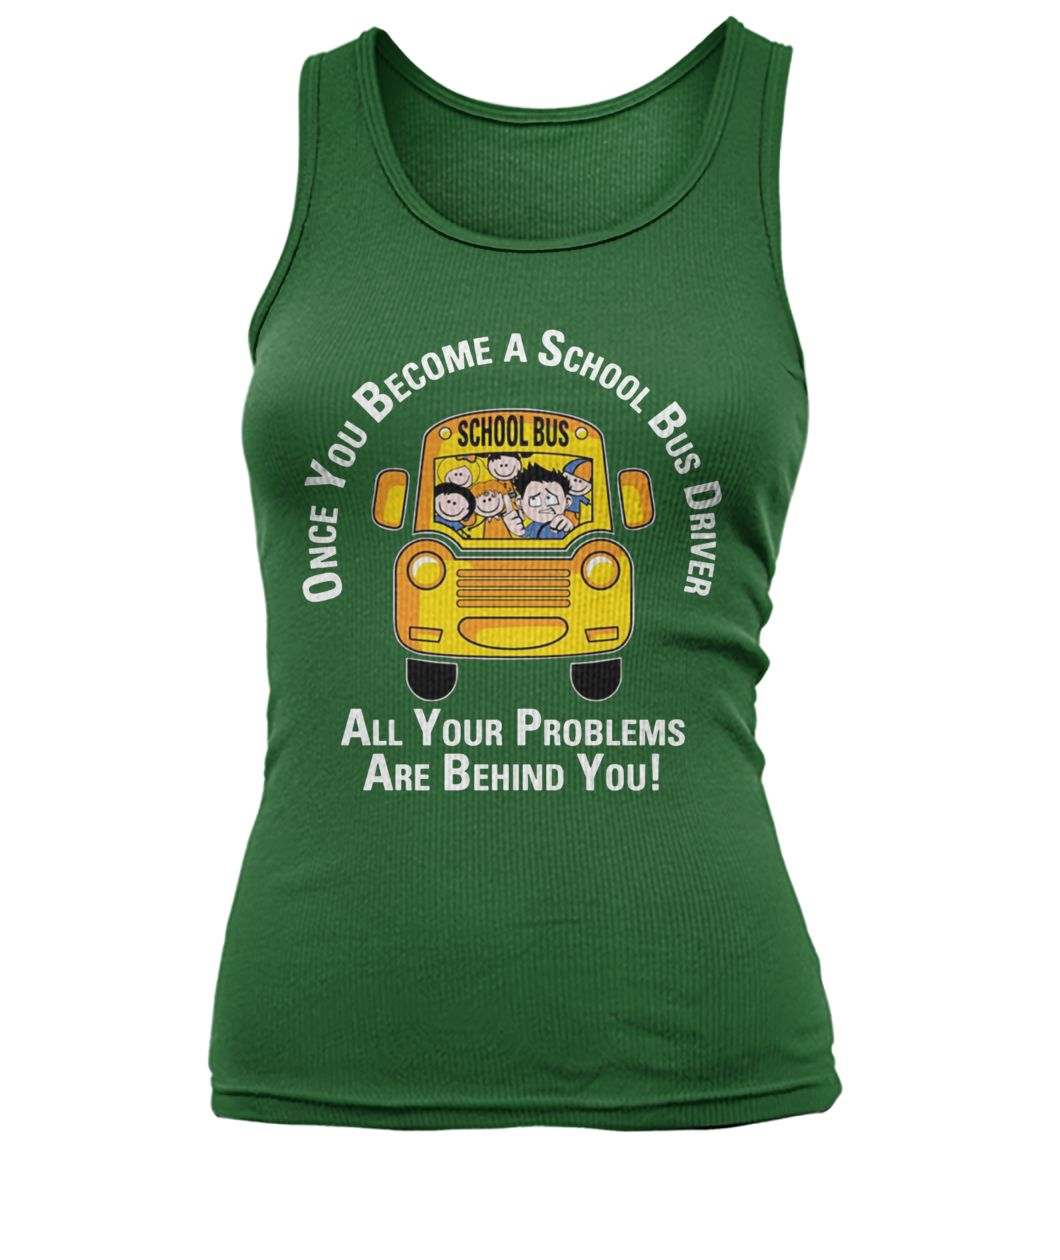 Once you become a school bus driver all your problem are behind you women's tank top